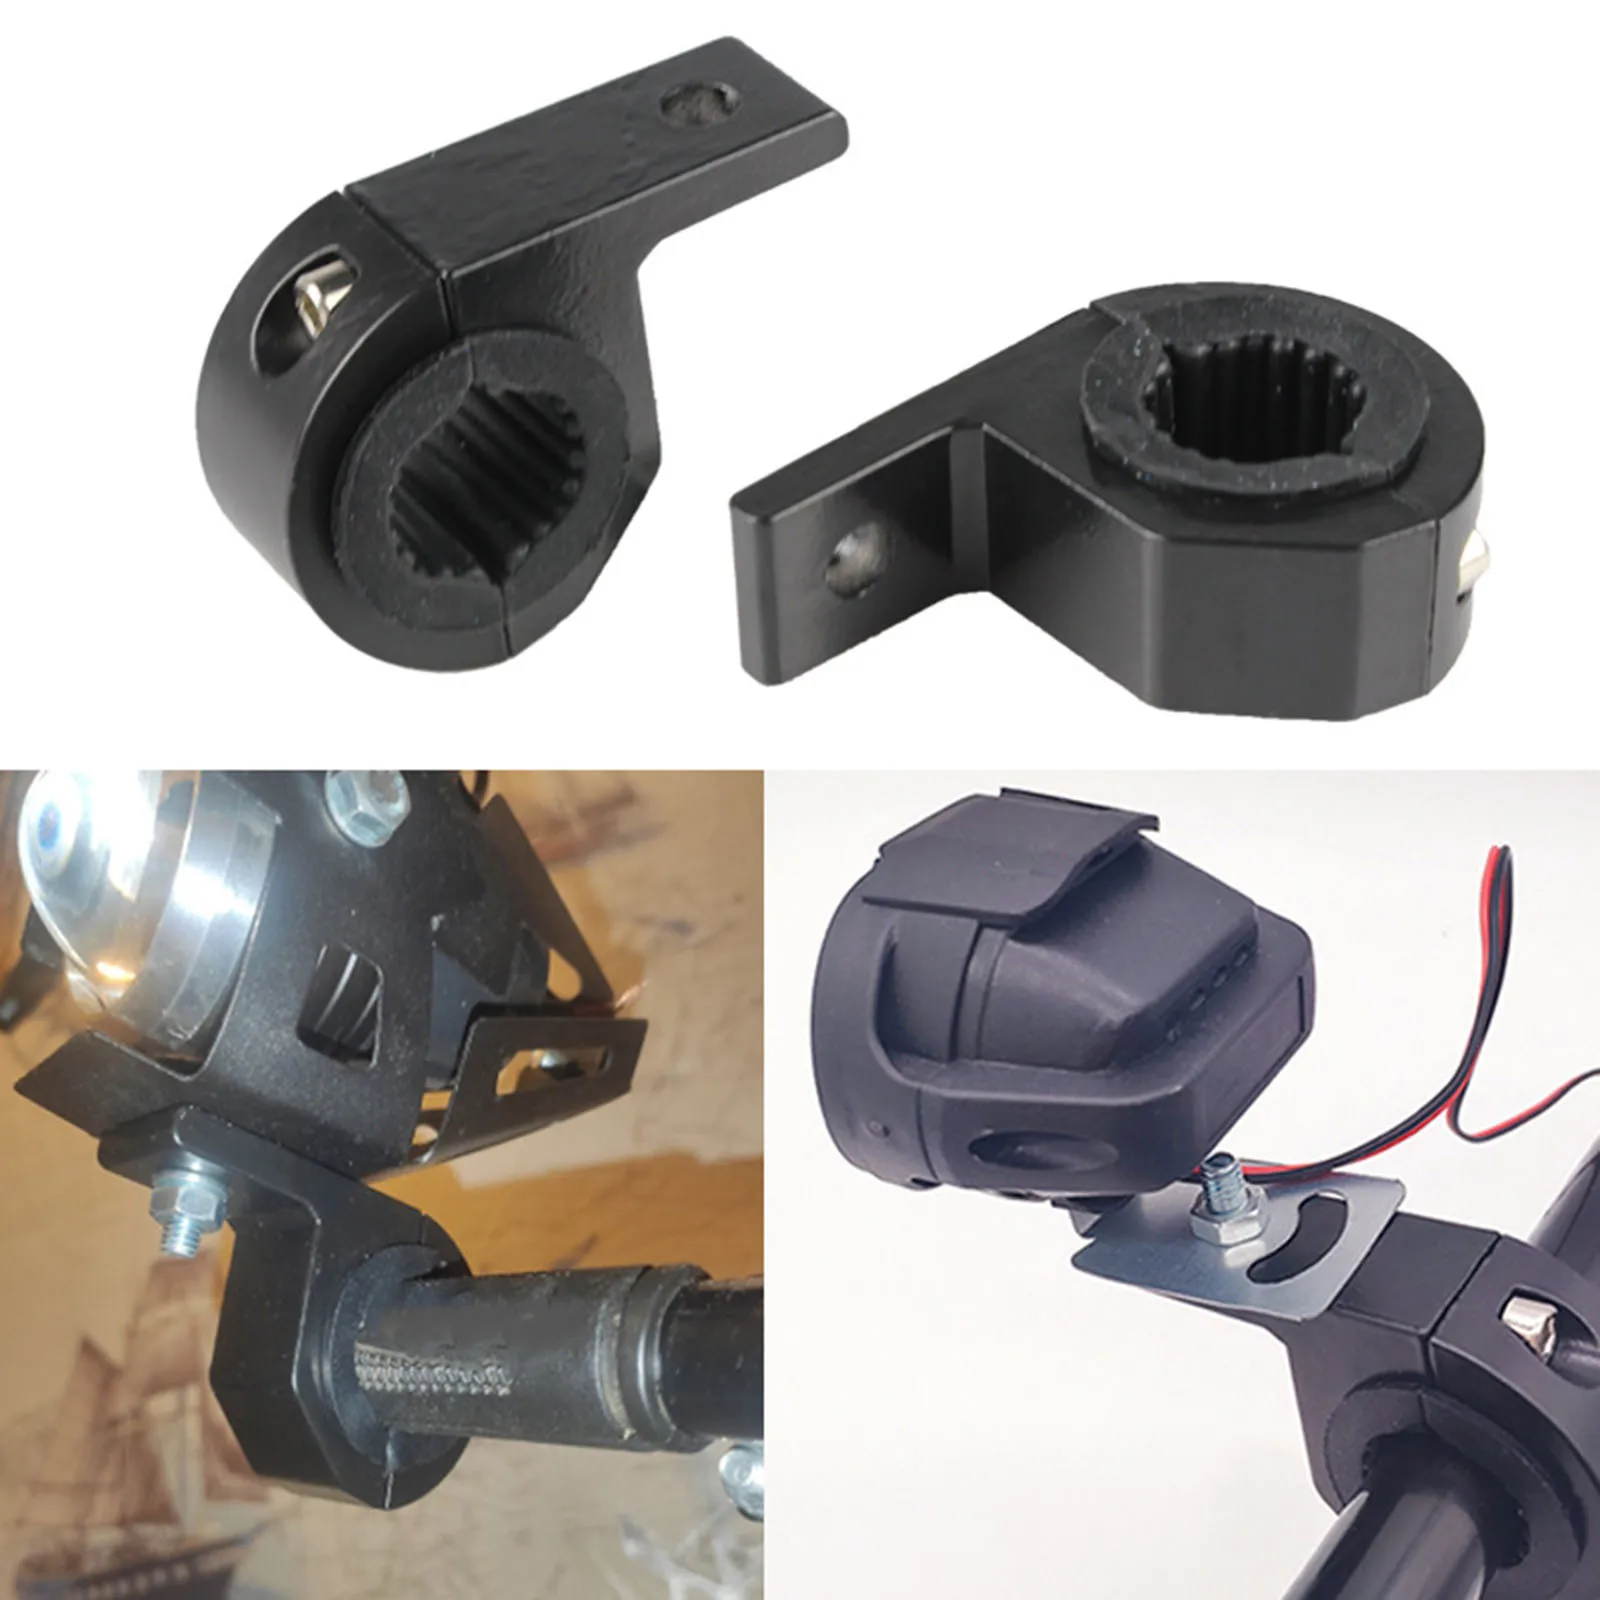 Motorcycle LED Headlight Clamps Brackets Tube Clamp Mount Kit For Motorcycle Moto Accessories